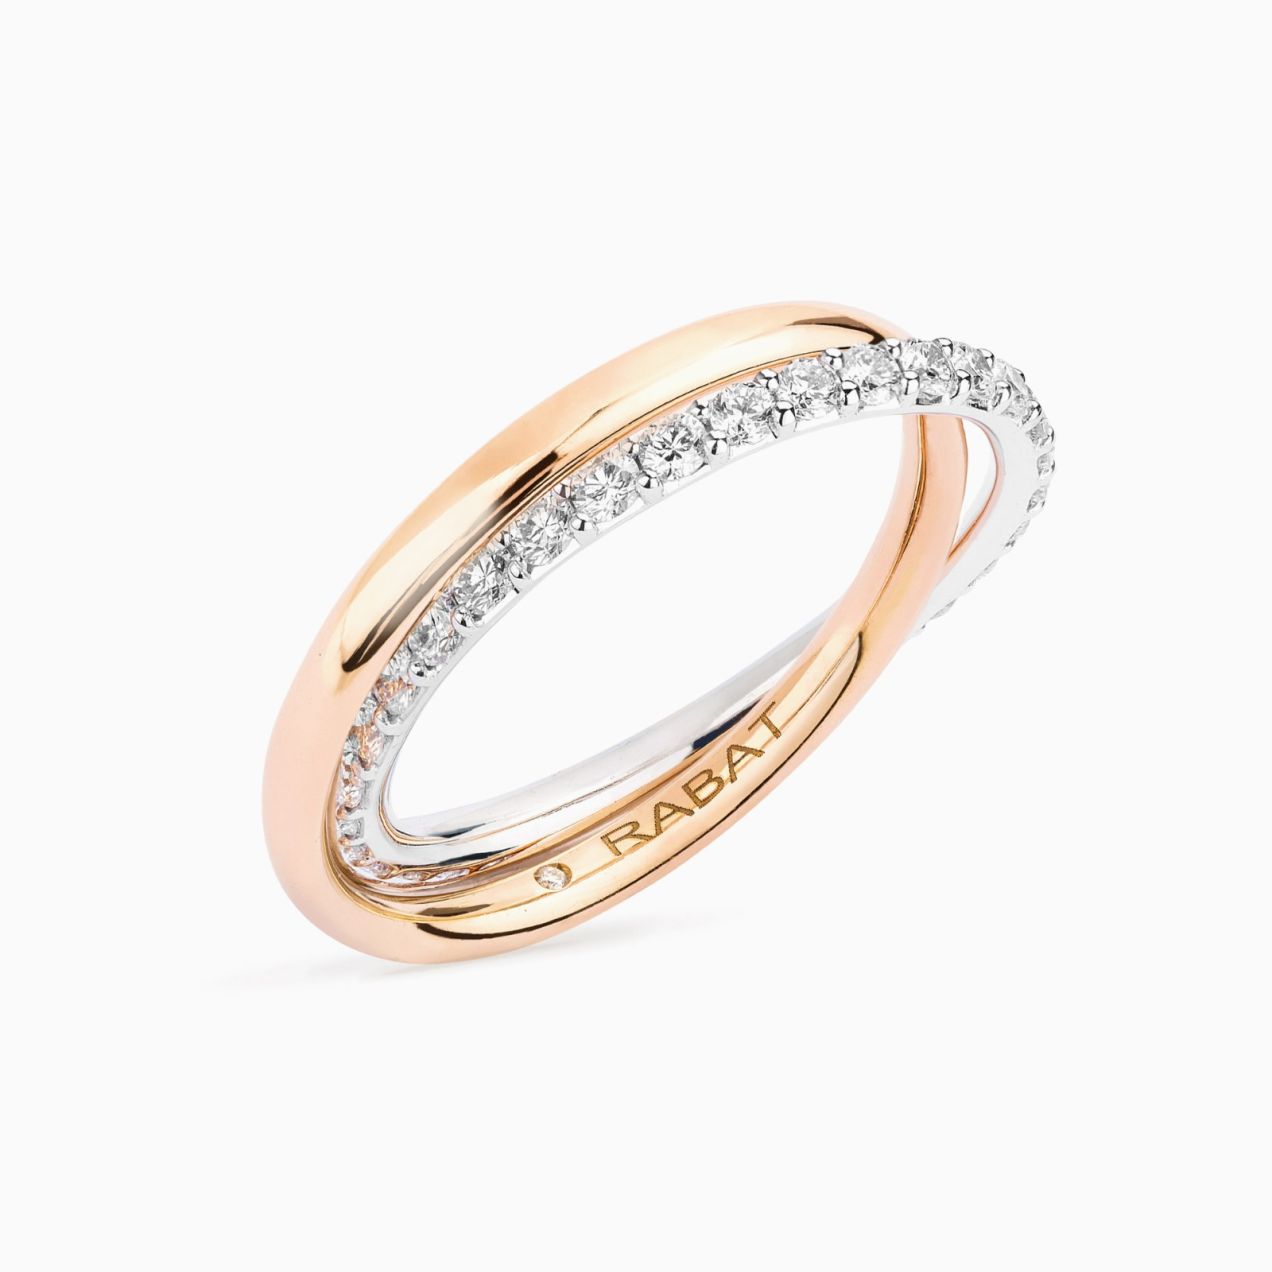 Double wedding band in rose gold and white gold with diamonds